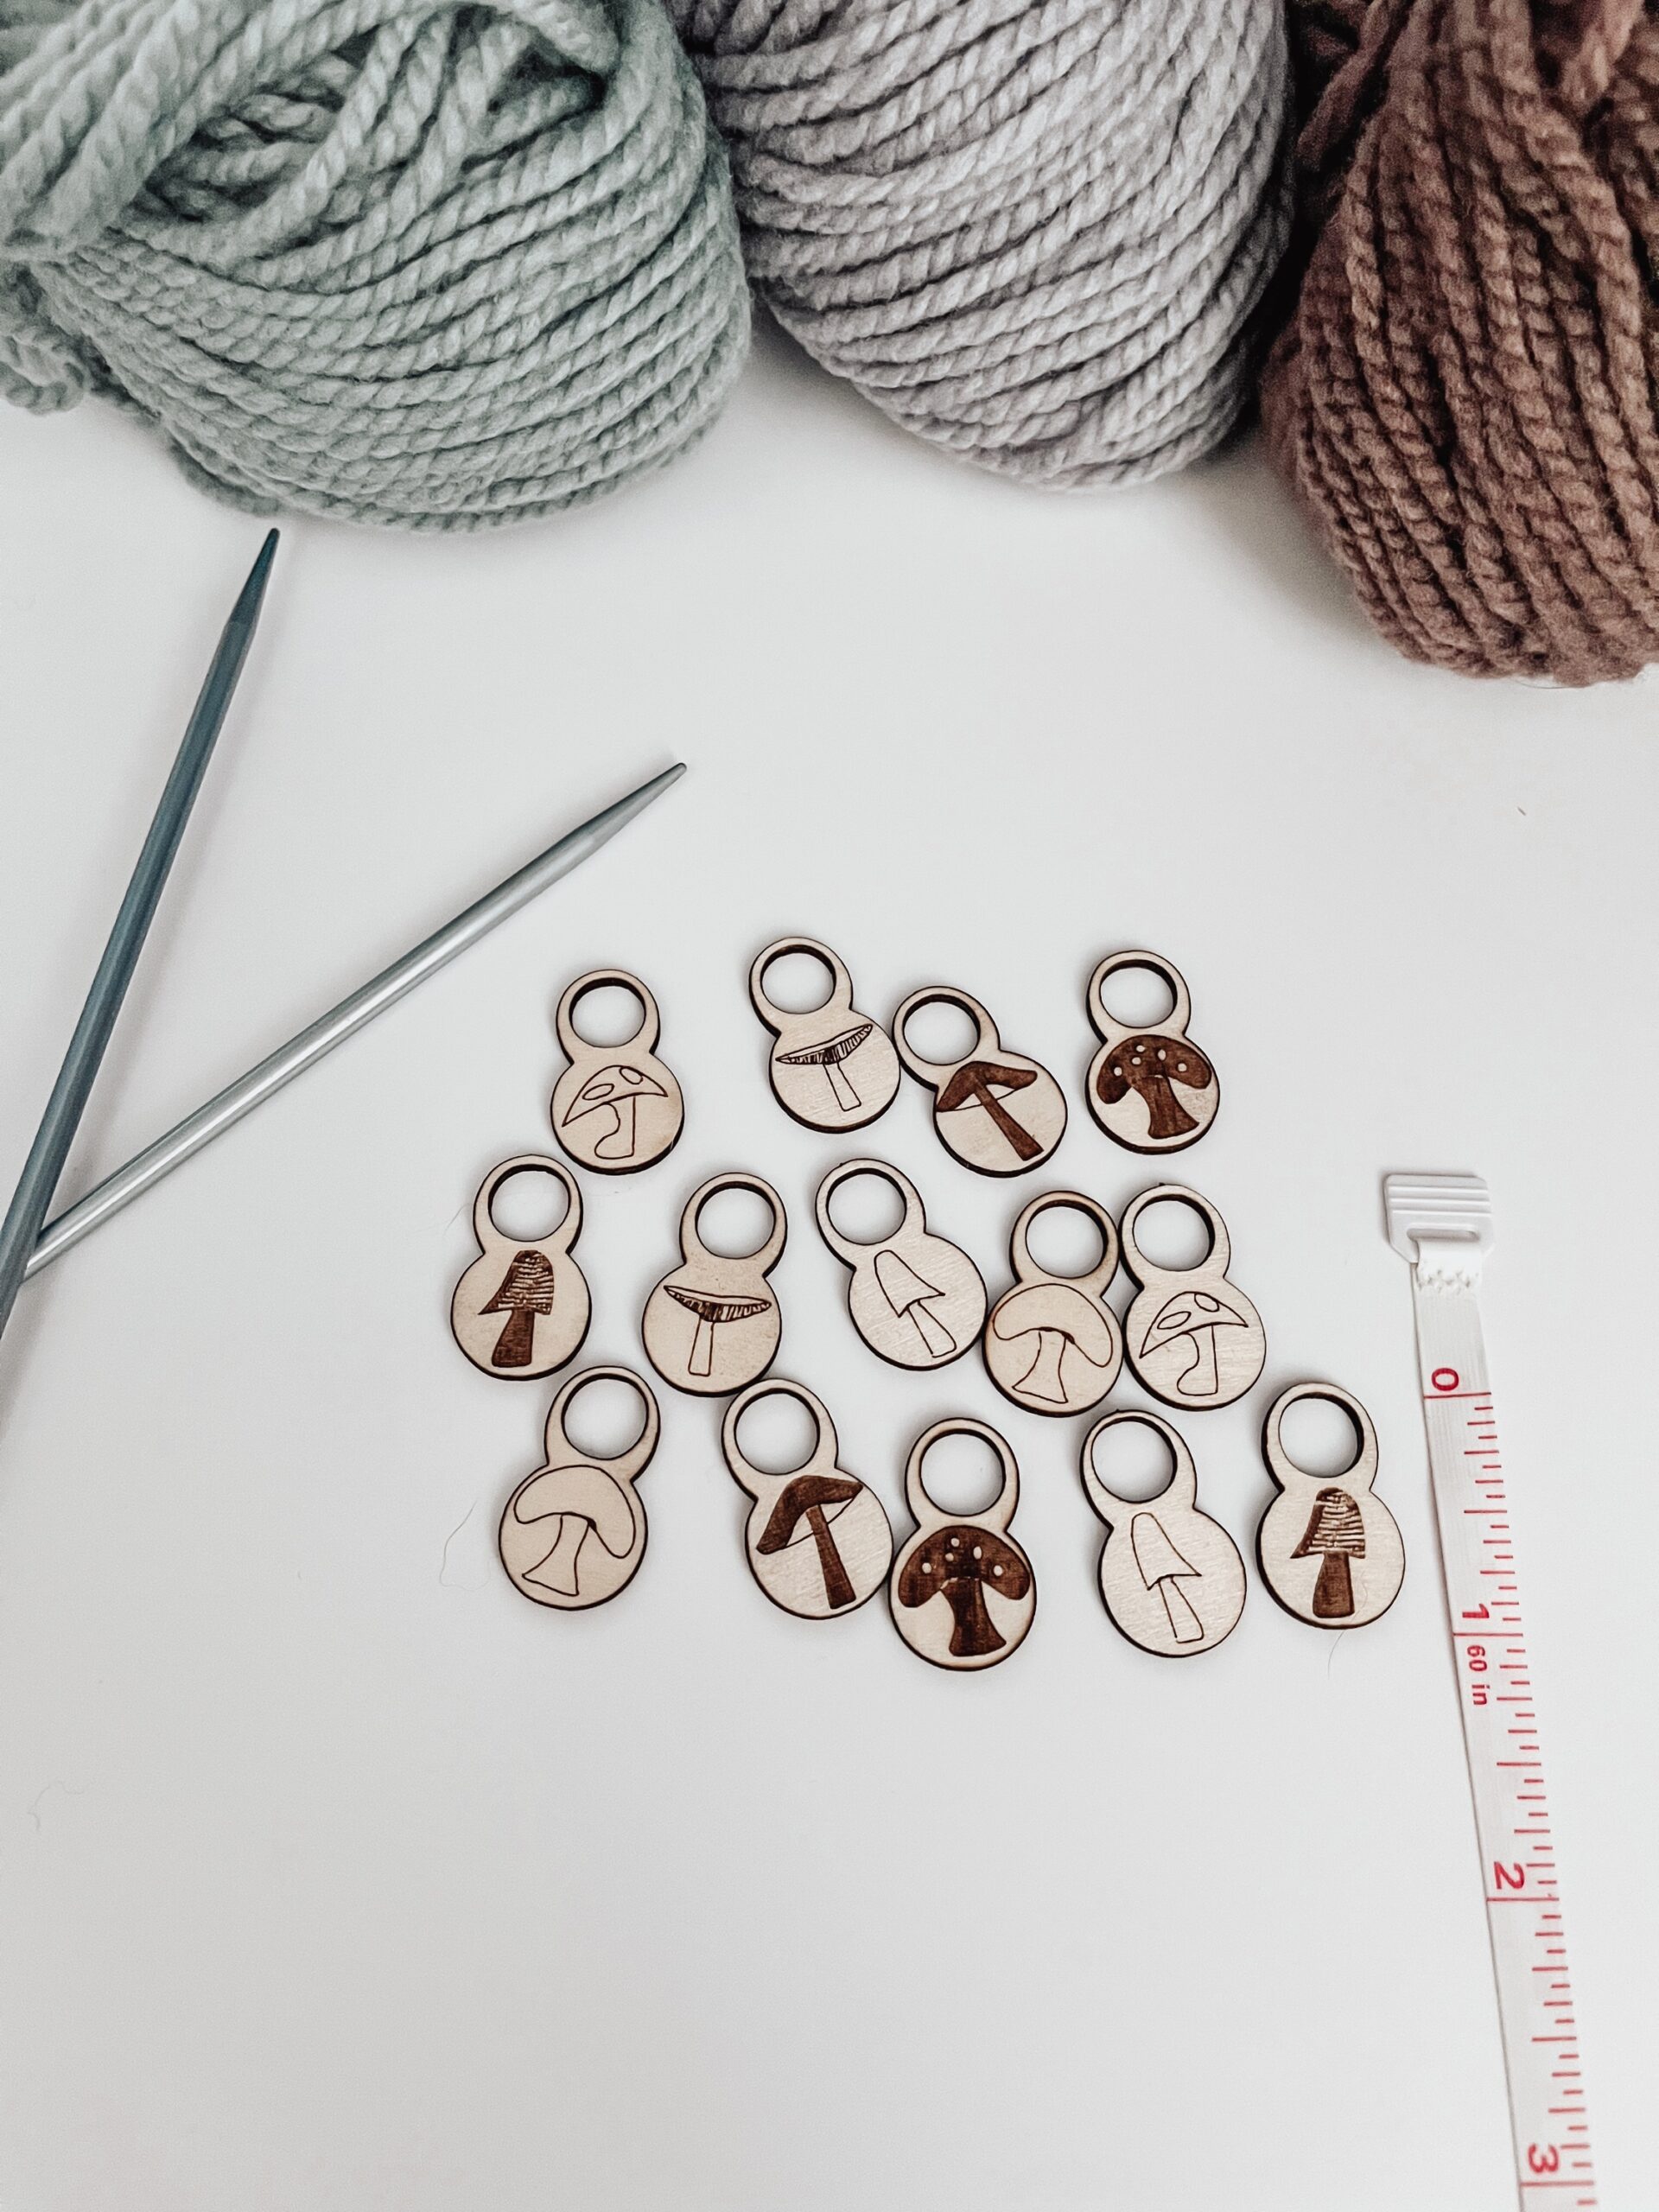 A total of 14 wood stitch markers with a variety of hand-drawn mushroom designs are displayed next to a measuring tape that shows they're approximately 1/2" tall. A pair of metal knitting needles and three skeins of merino yarn are in the background.